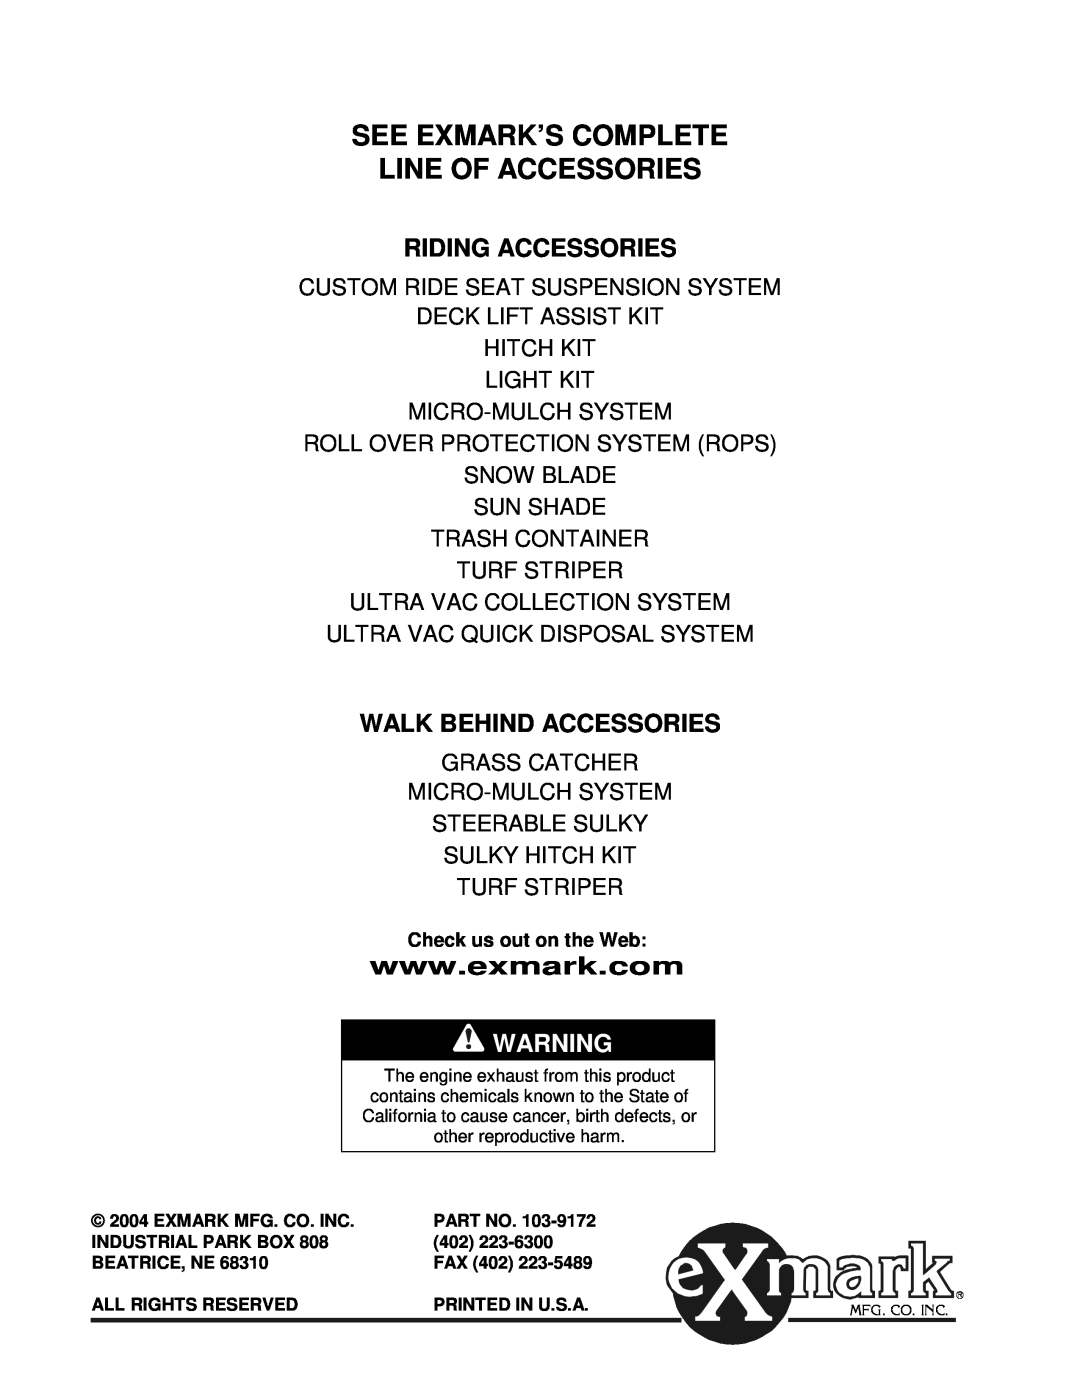 Exmark LAZER Z HP manual Riding Accessories, Walk Behind Accessories, See Exmark’S Complete Line Of Accessories 